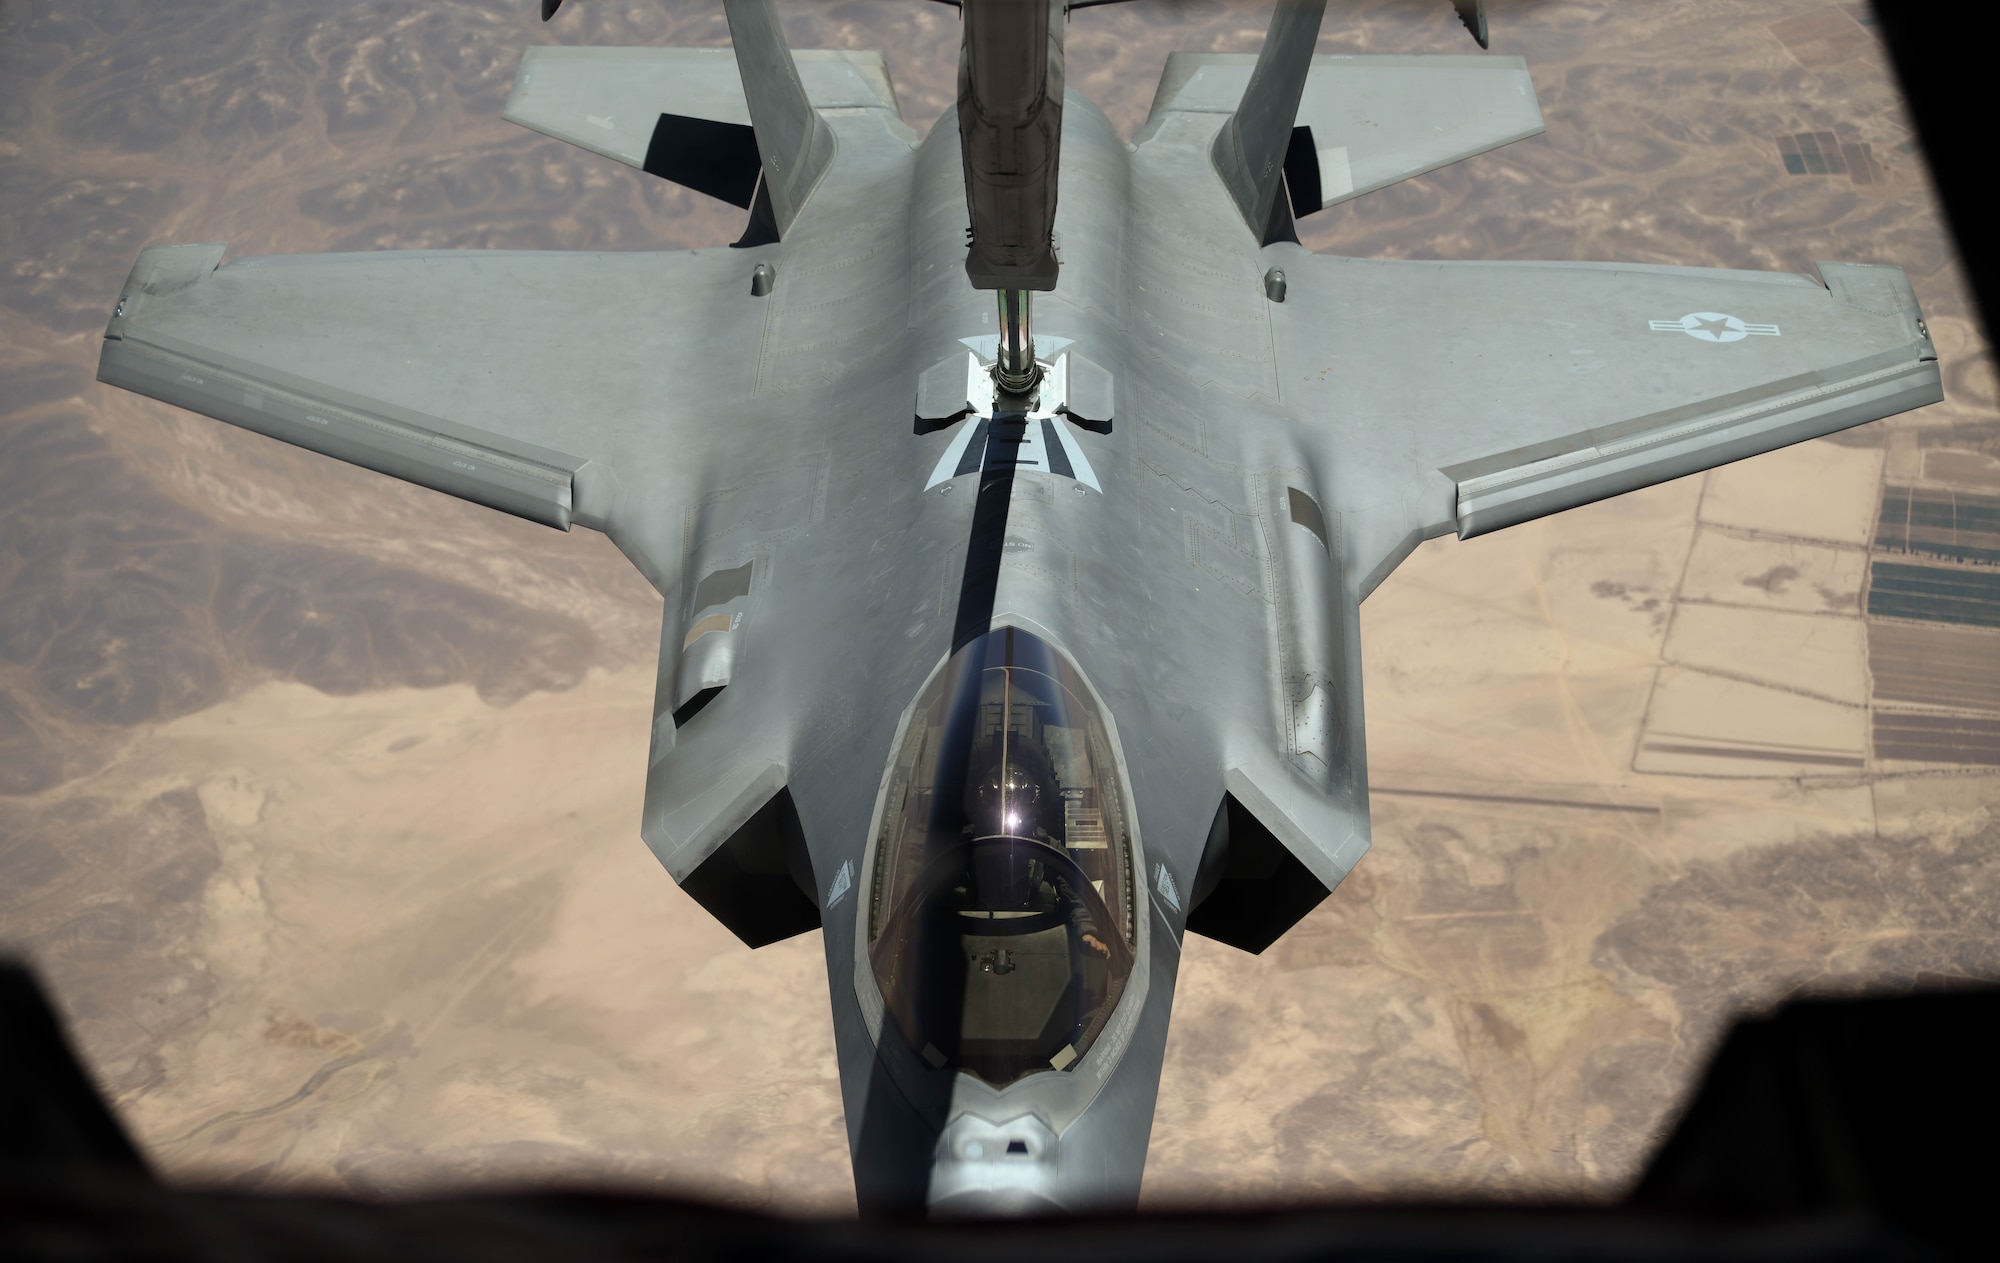 A 421st Fighter Squadron F-35A Lightning II aircraft connects with a 908th Expeditionary Refueling Squadron KC-10 Extender to refuel during “Enduring Lightning II” exercise over southern Israel Aug. 2, 2020. While forging a resolute partnership, the allies train to maintain a ready posture to deter against regional aggressors. (U.S. Air Force photo by Tech. Sgt. Charles Taylor)